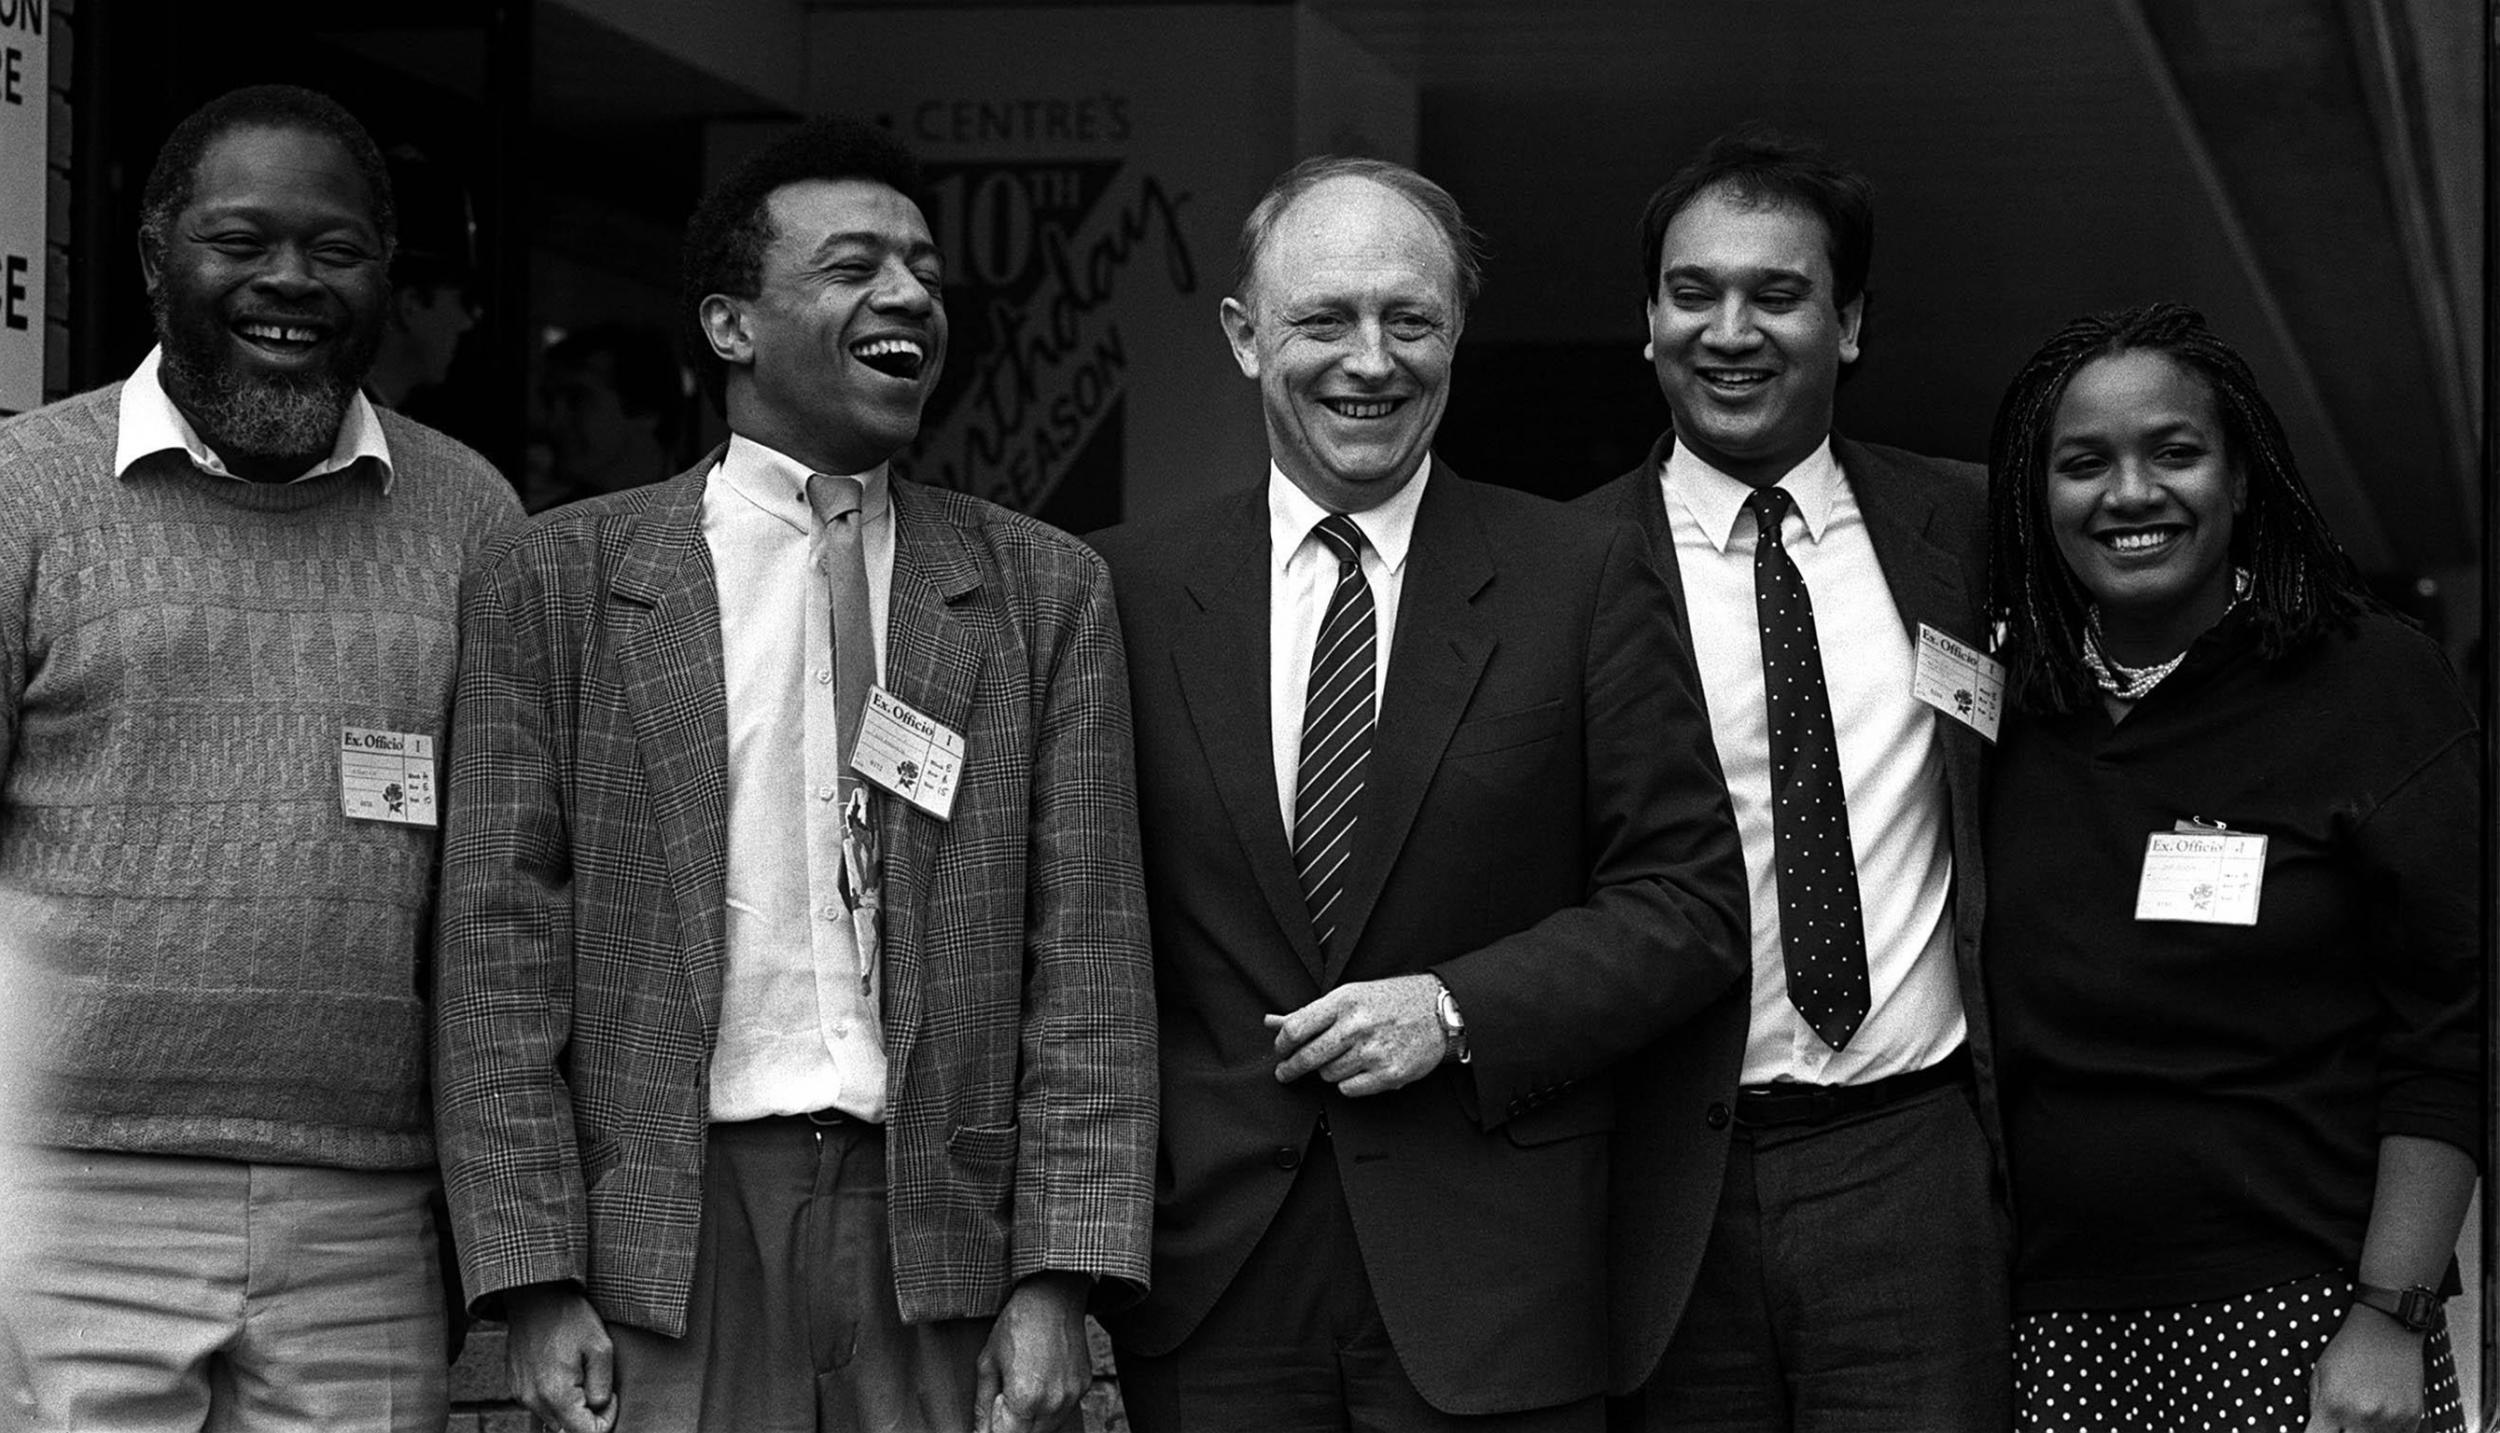 Neil Kinnock opposed the ‘black sections’ movement in the Labour Party. He is pictured with, from left, Bernie Grant, Paul Boateng, Keith Vaz and Diane Abbott in 1987